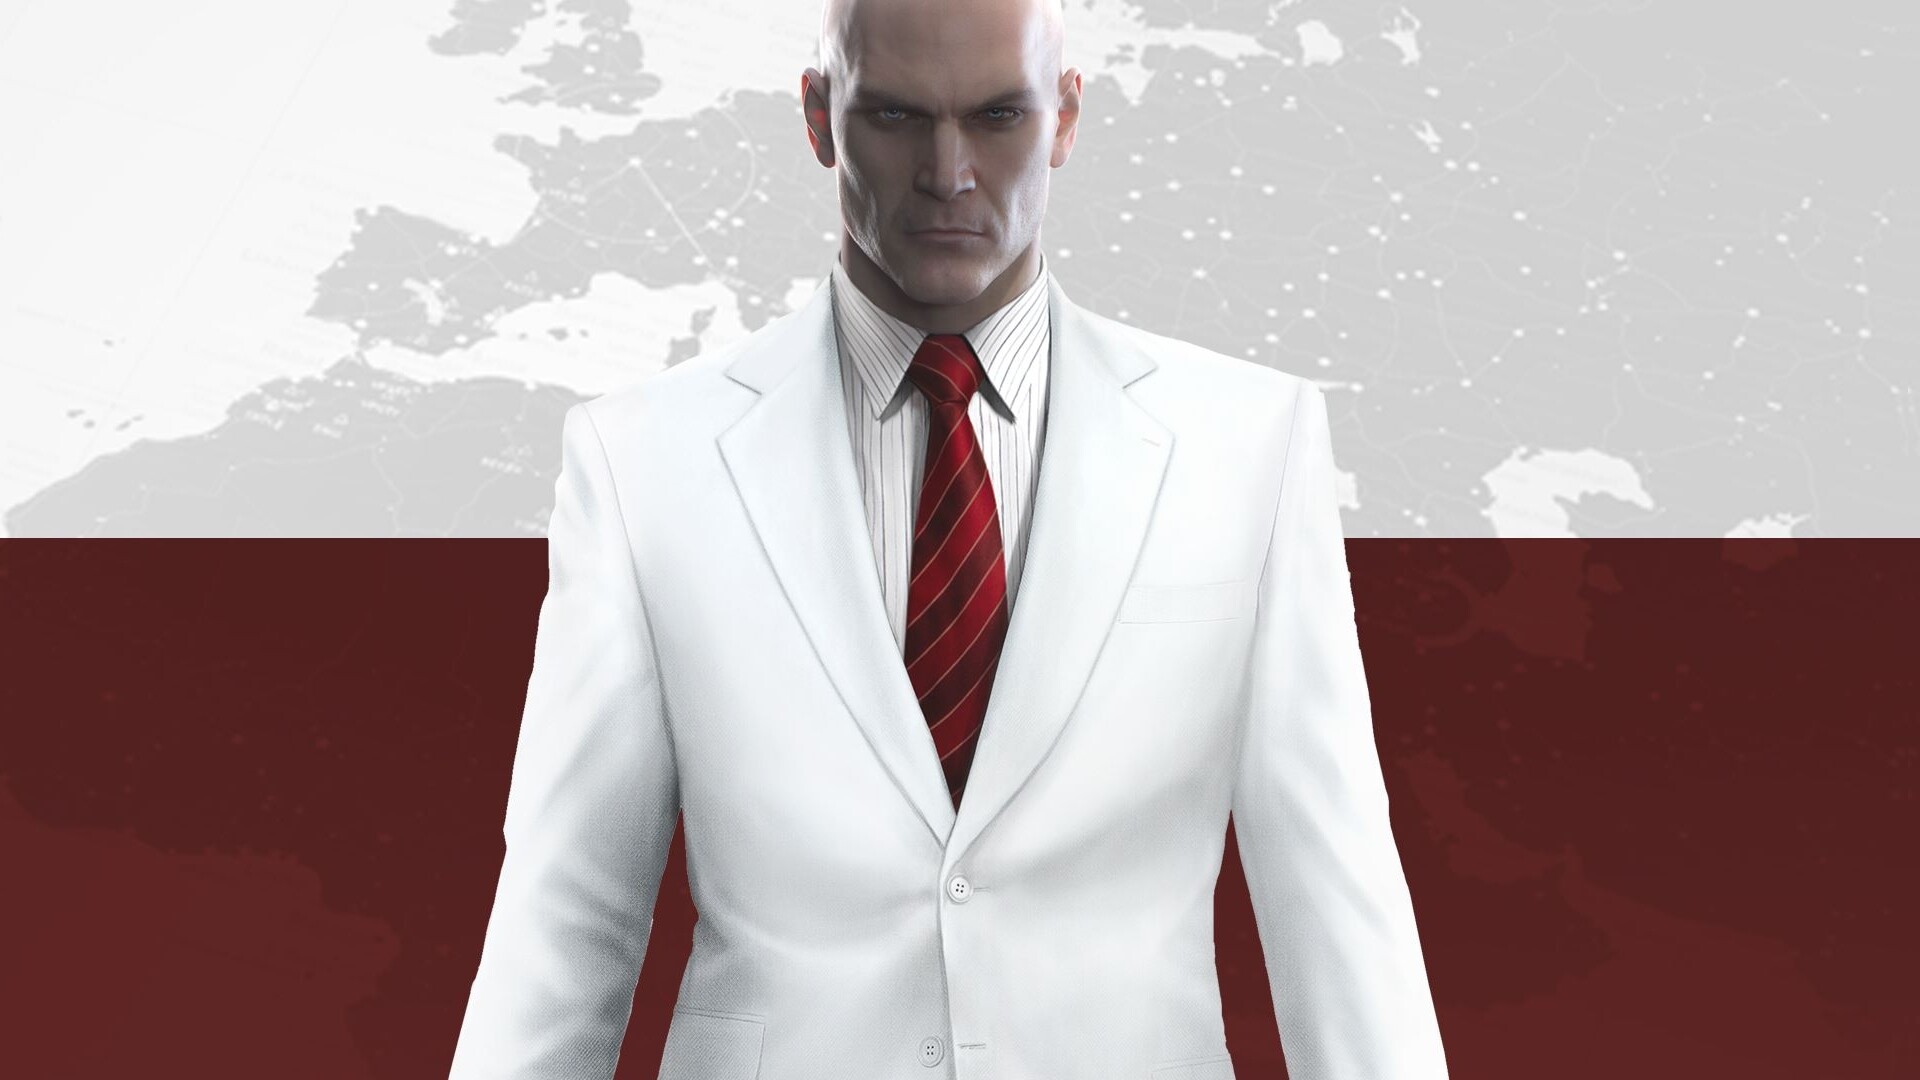 Hitman (Game): Regarded as one of the best assassins in video games by GamesRadar+. 1920x1080 Full HD Background.